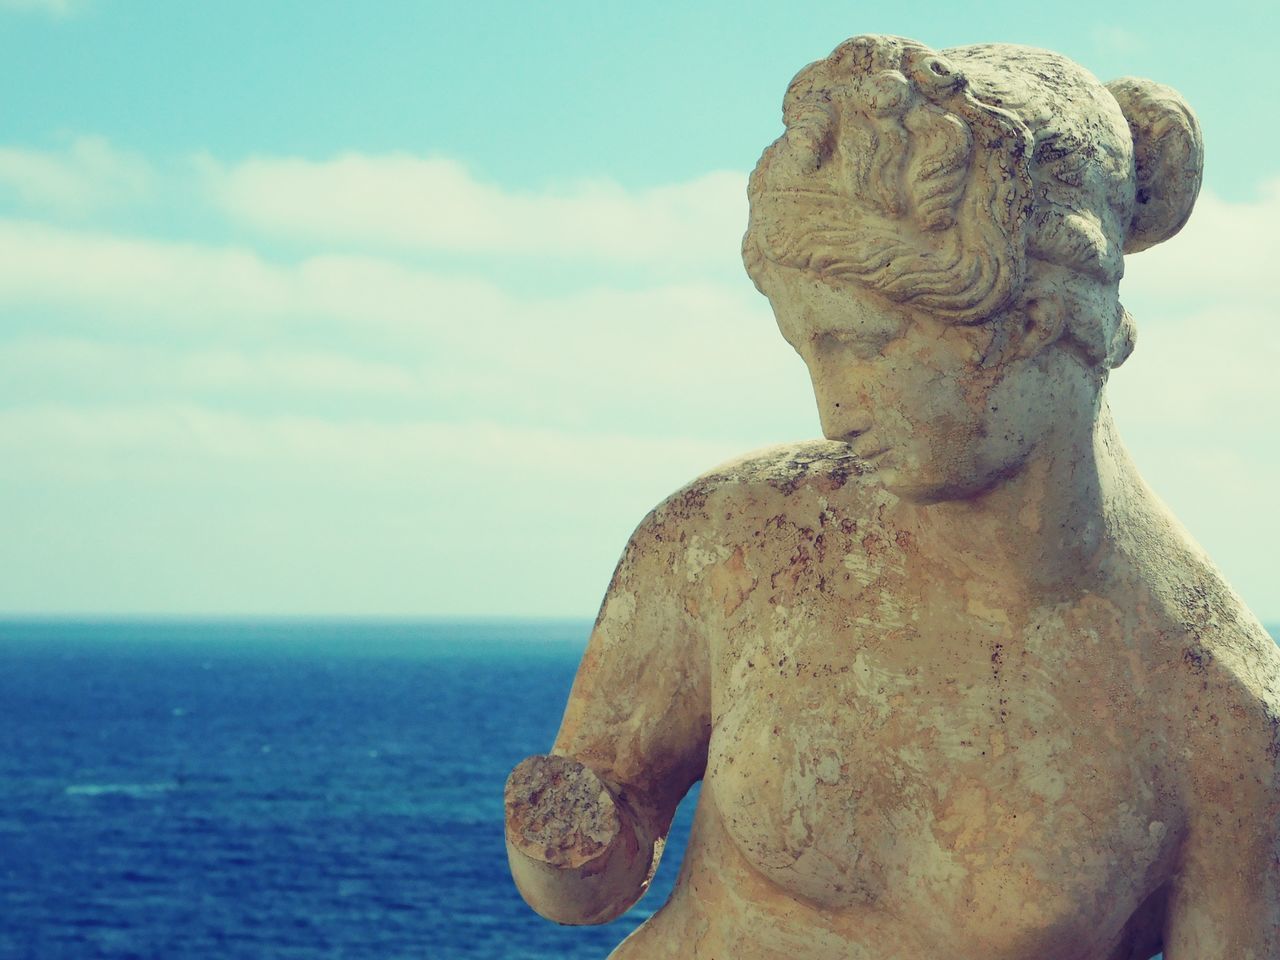 CLOSE-UP OF STATUE AGAINST SEA AGAINST SKY